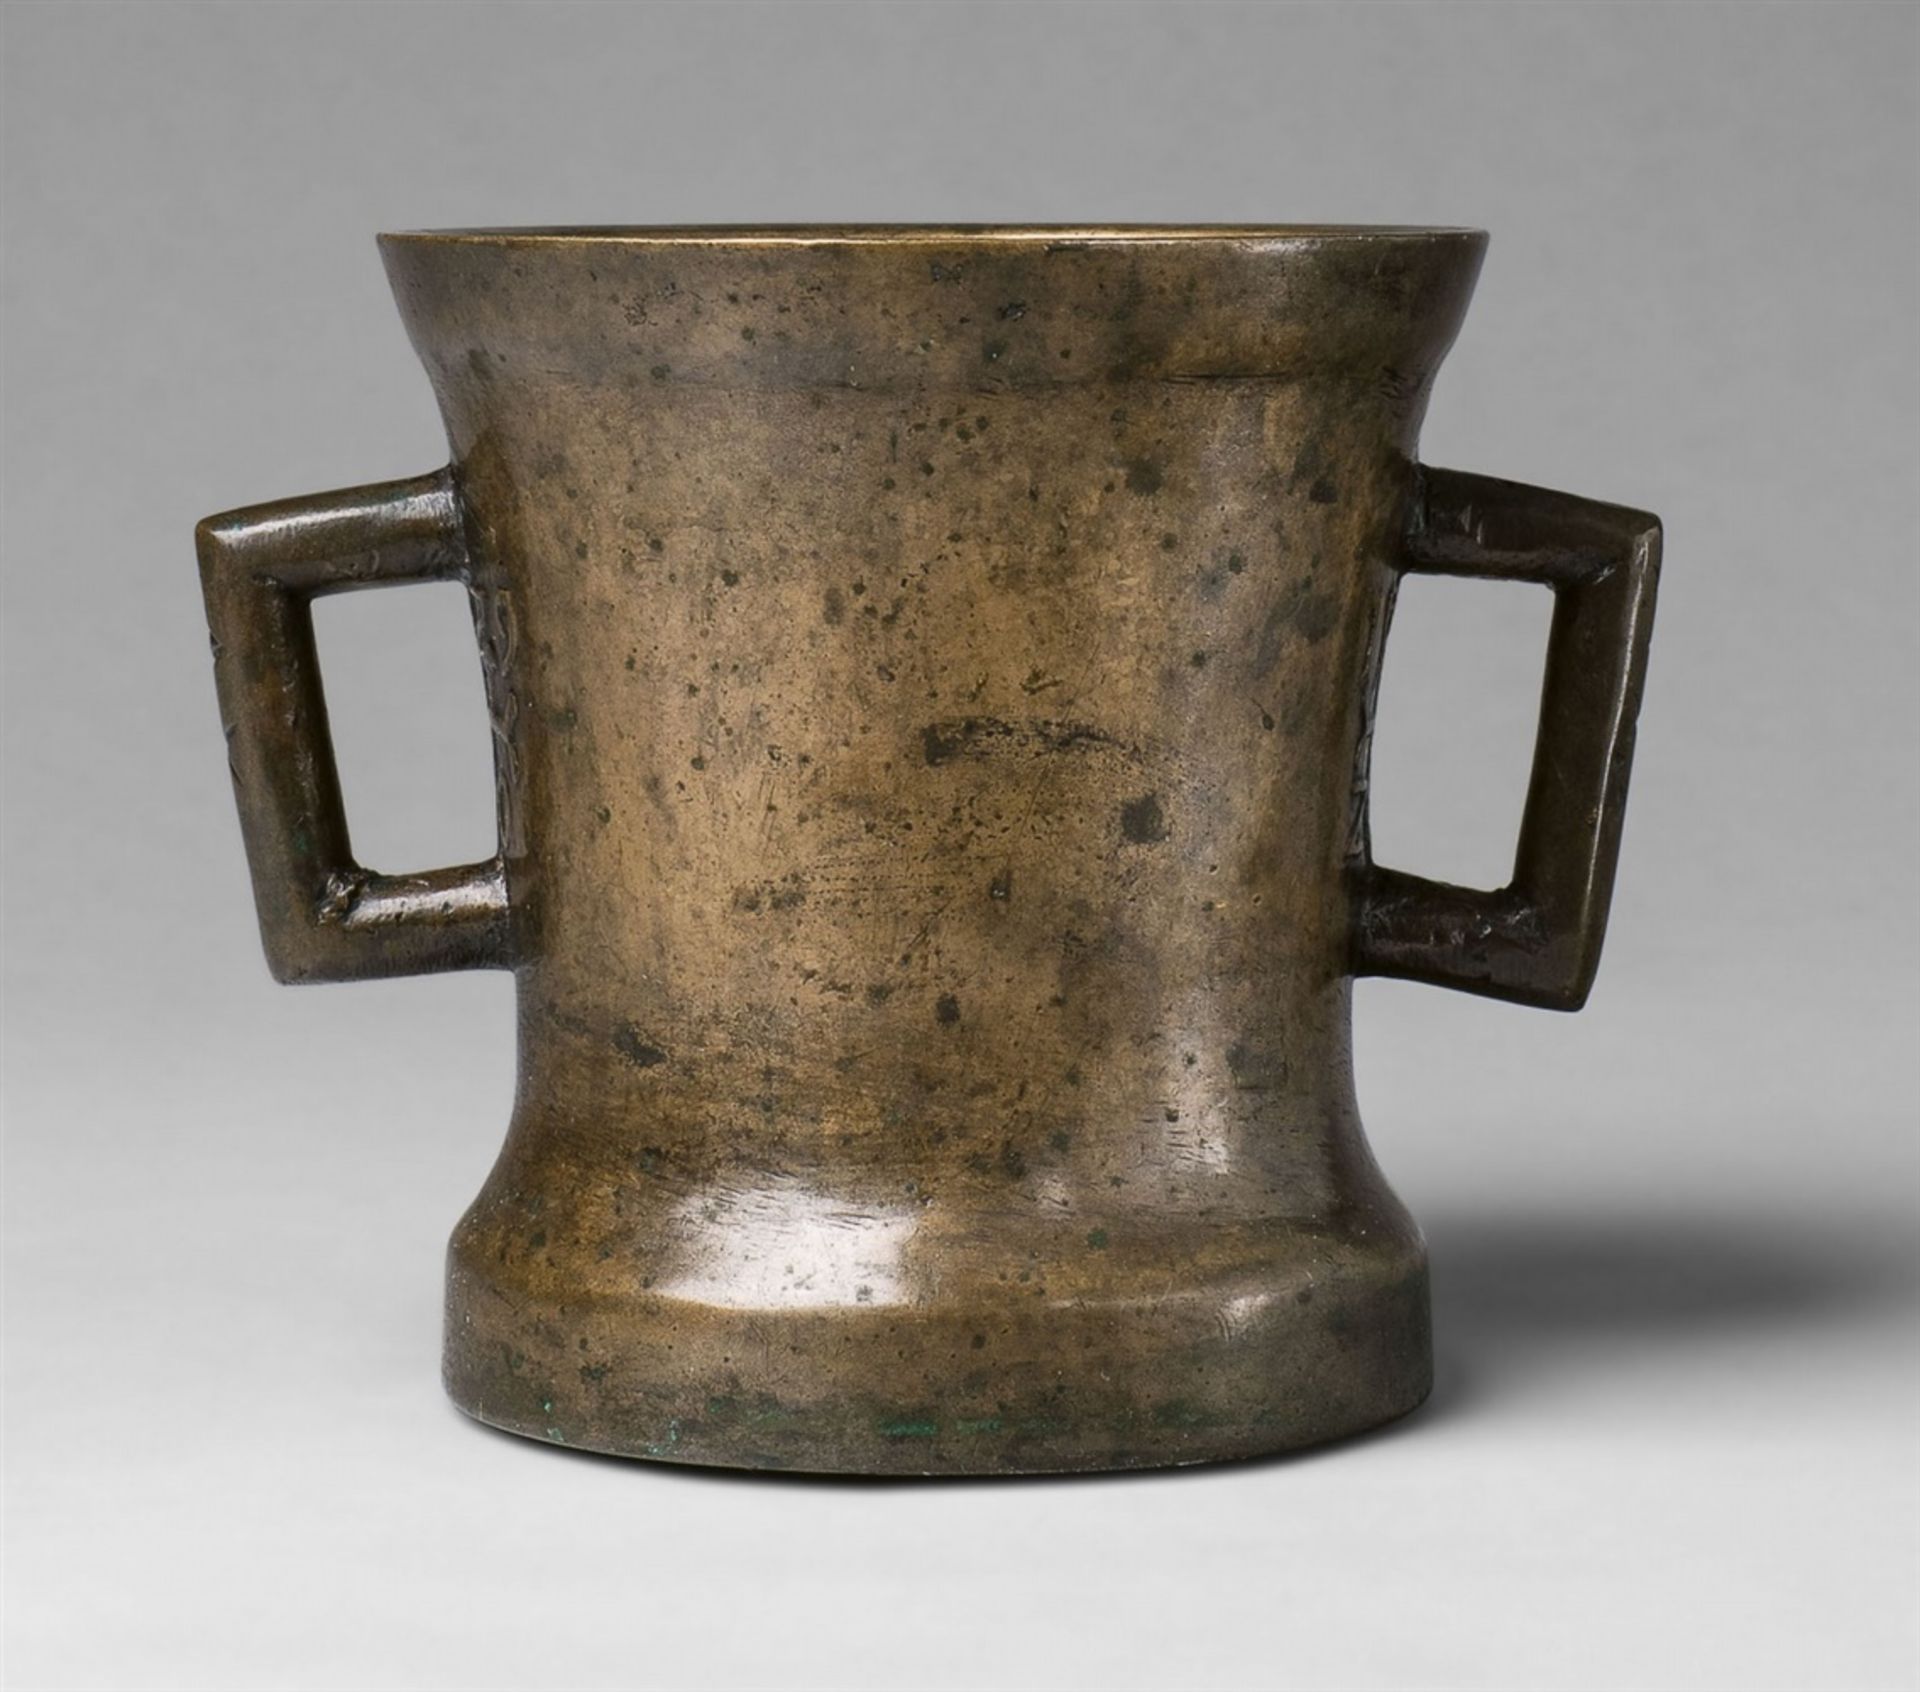 An early mortar dated 1529Golden brown cast bronze with natural patina. Cylindrical form on a